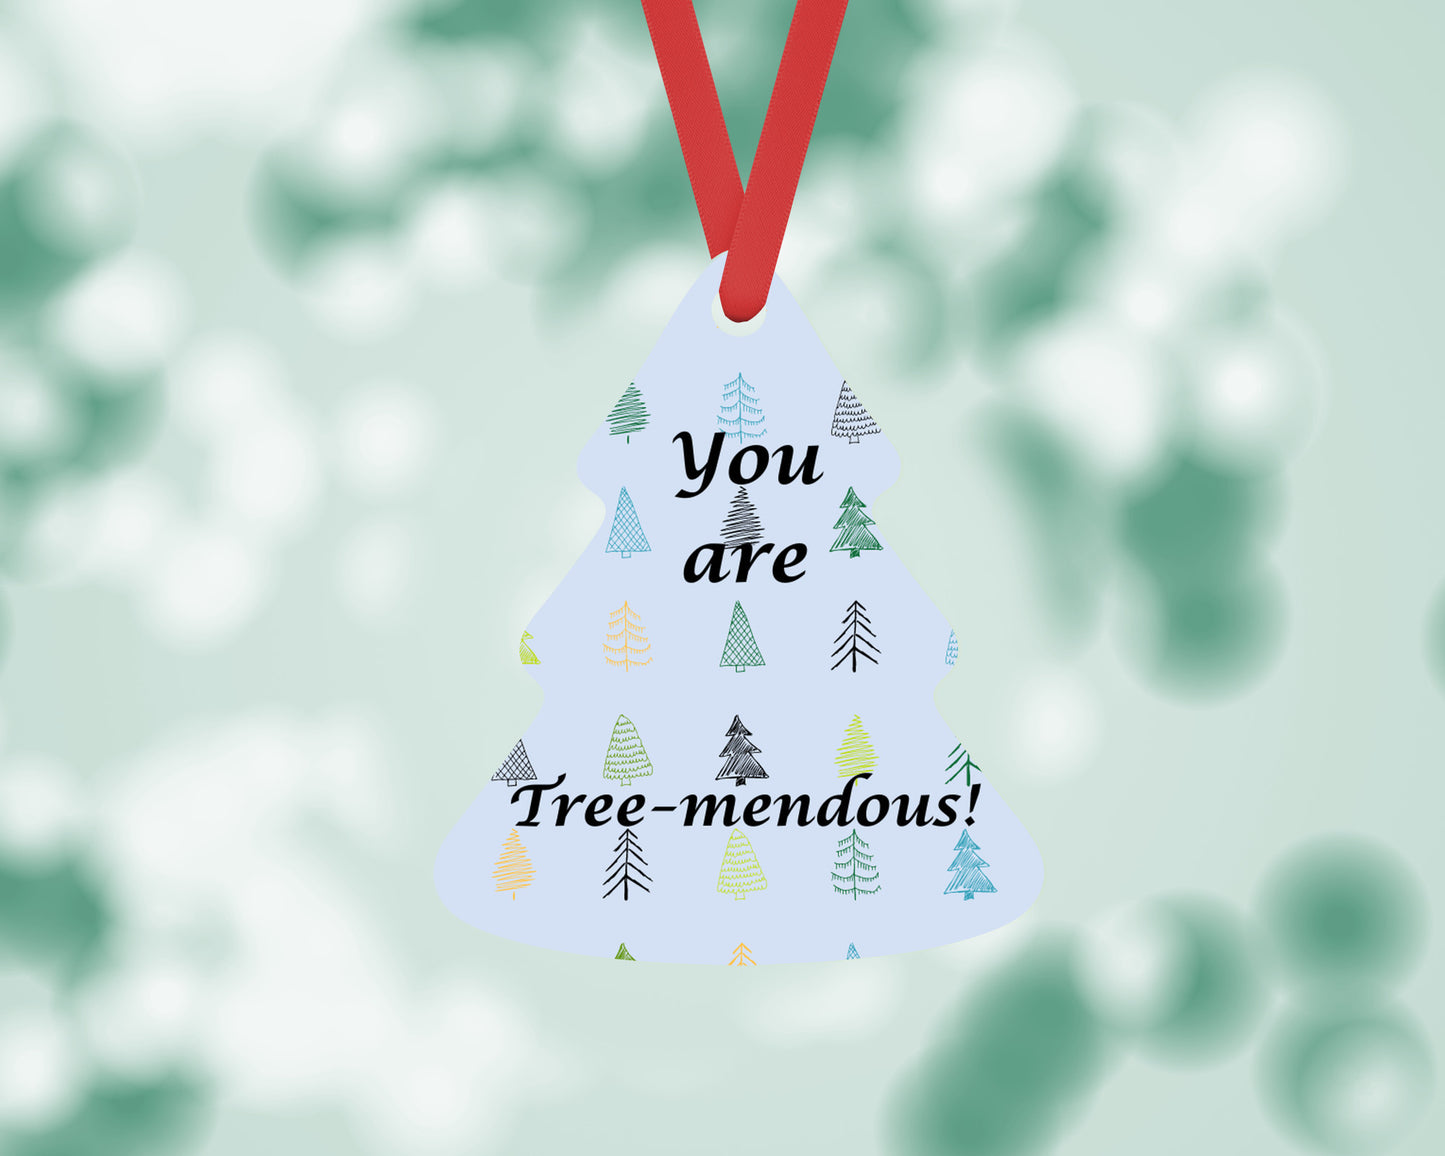 You are treemendous! - Christmas Ornament